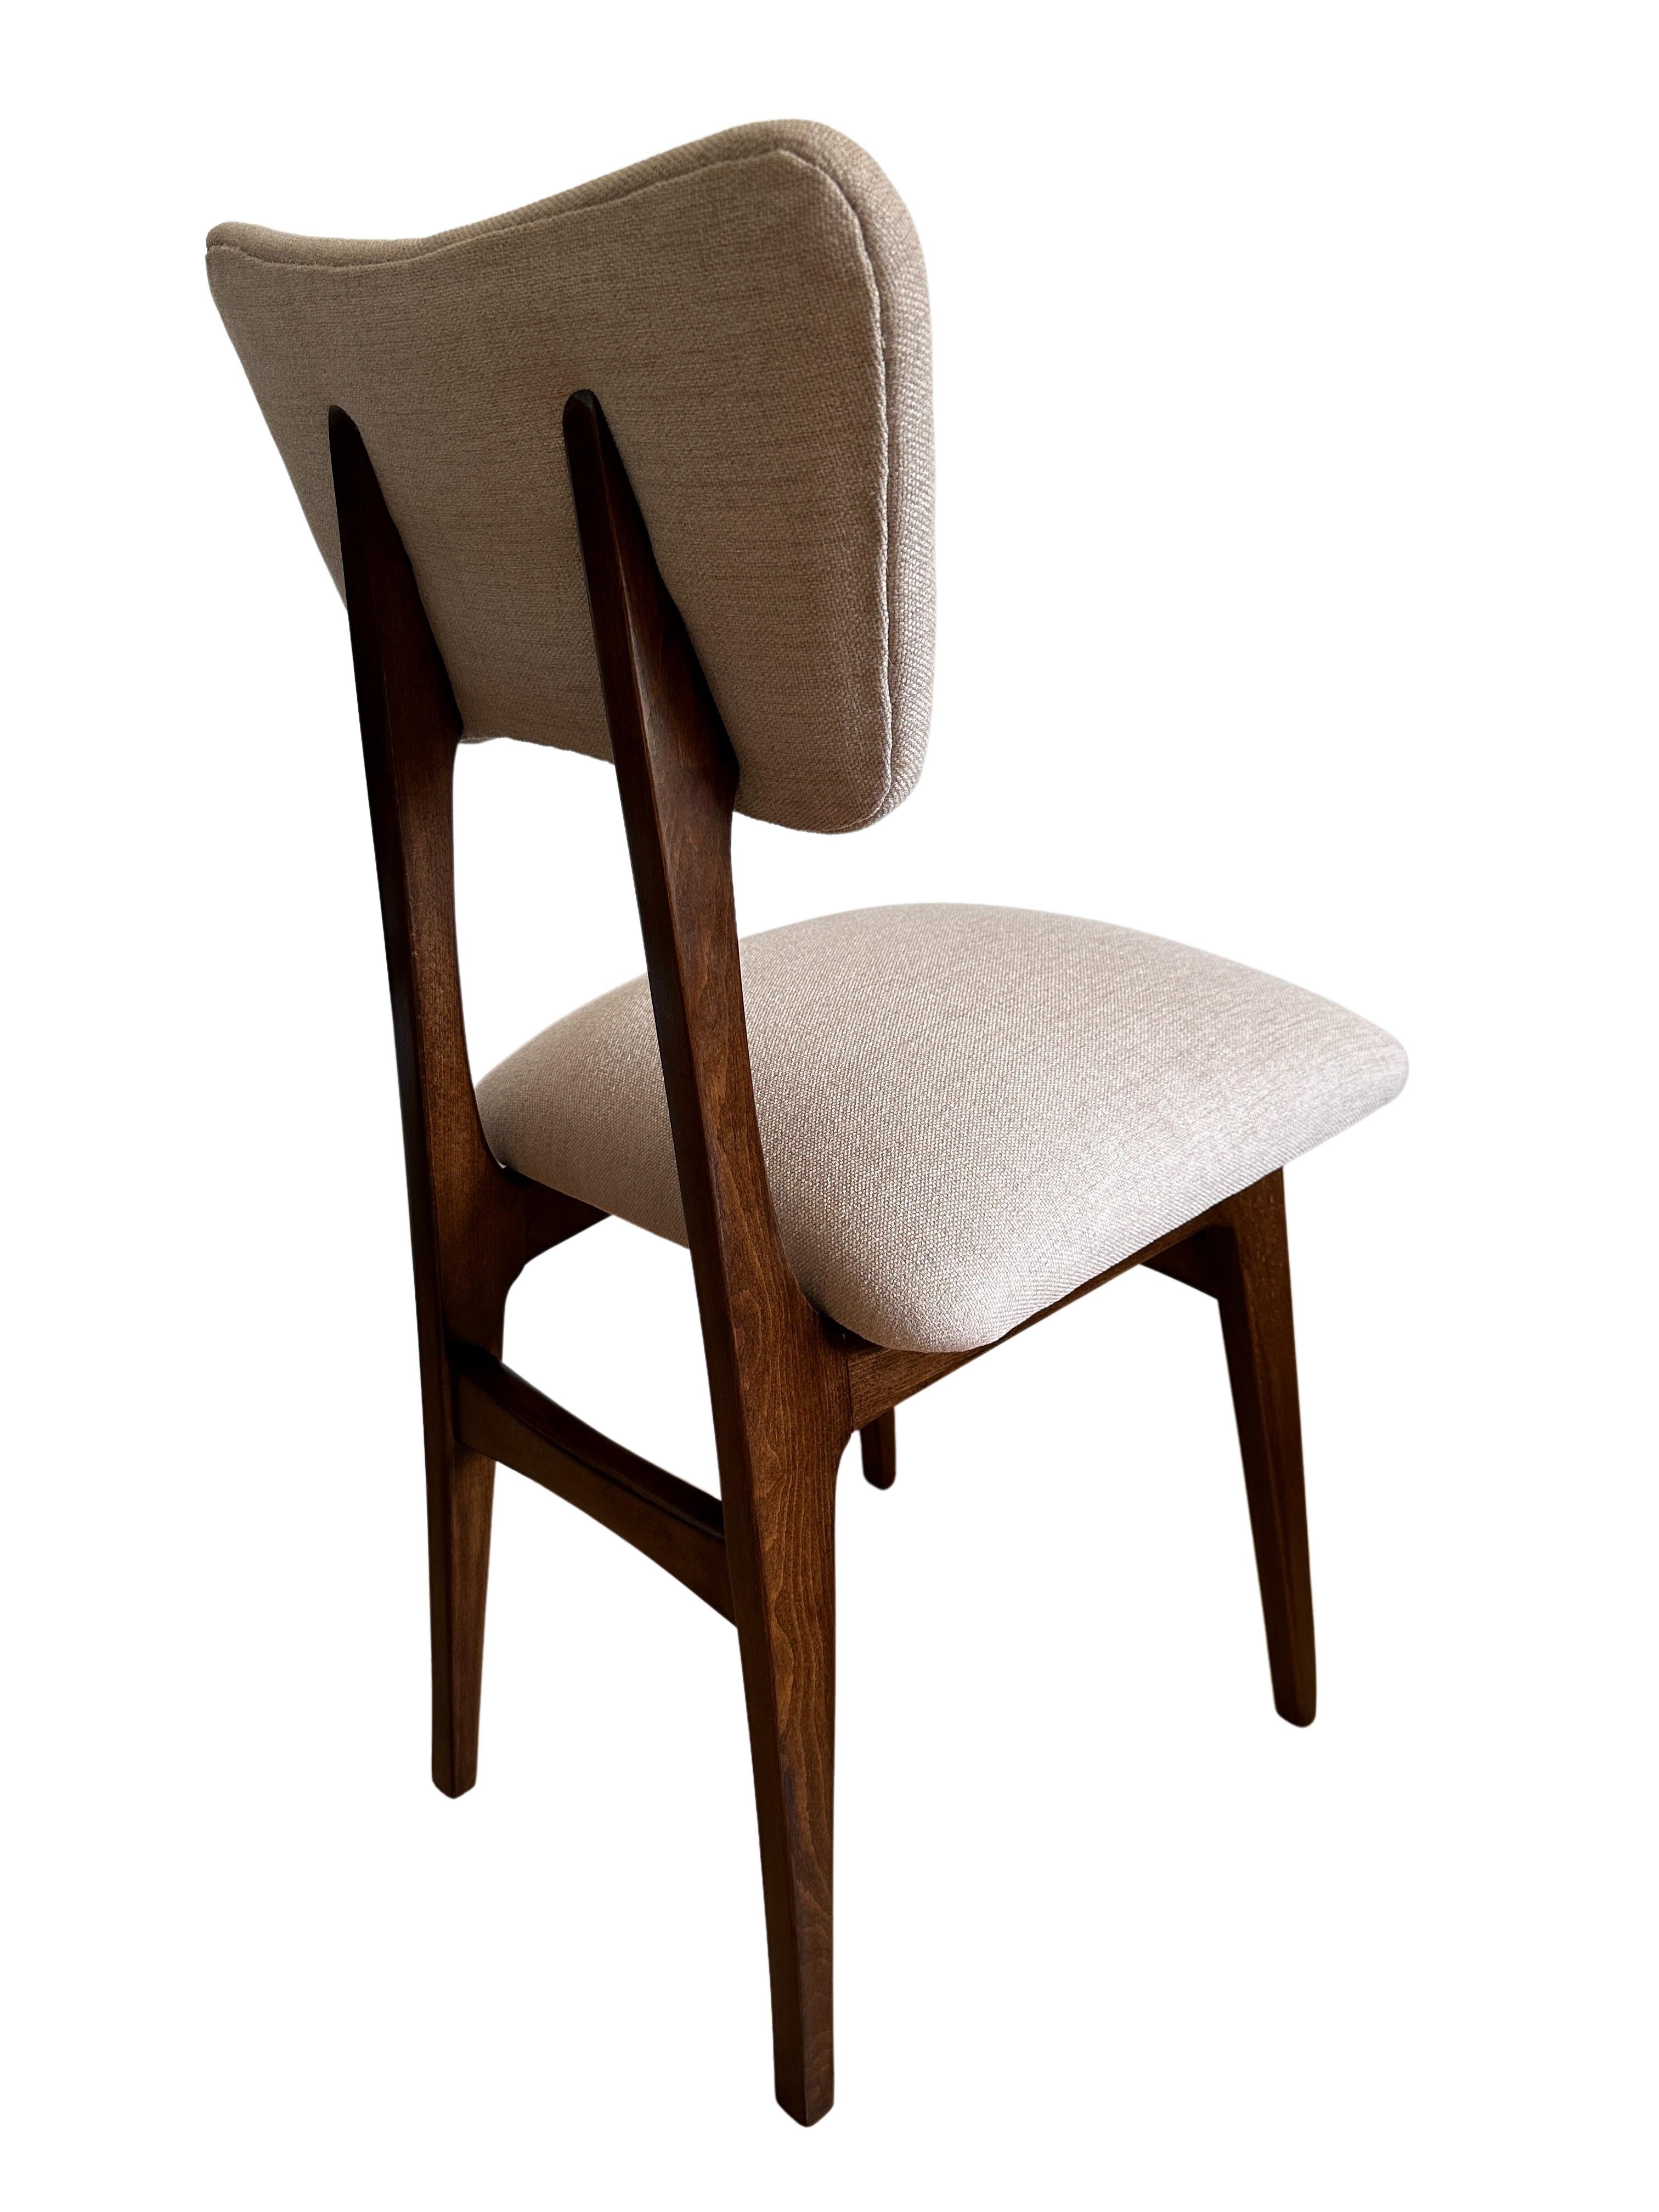 Midcentury Dining Chair in Beige, Europe, 1960s For Sale 1